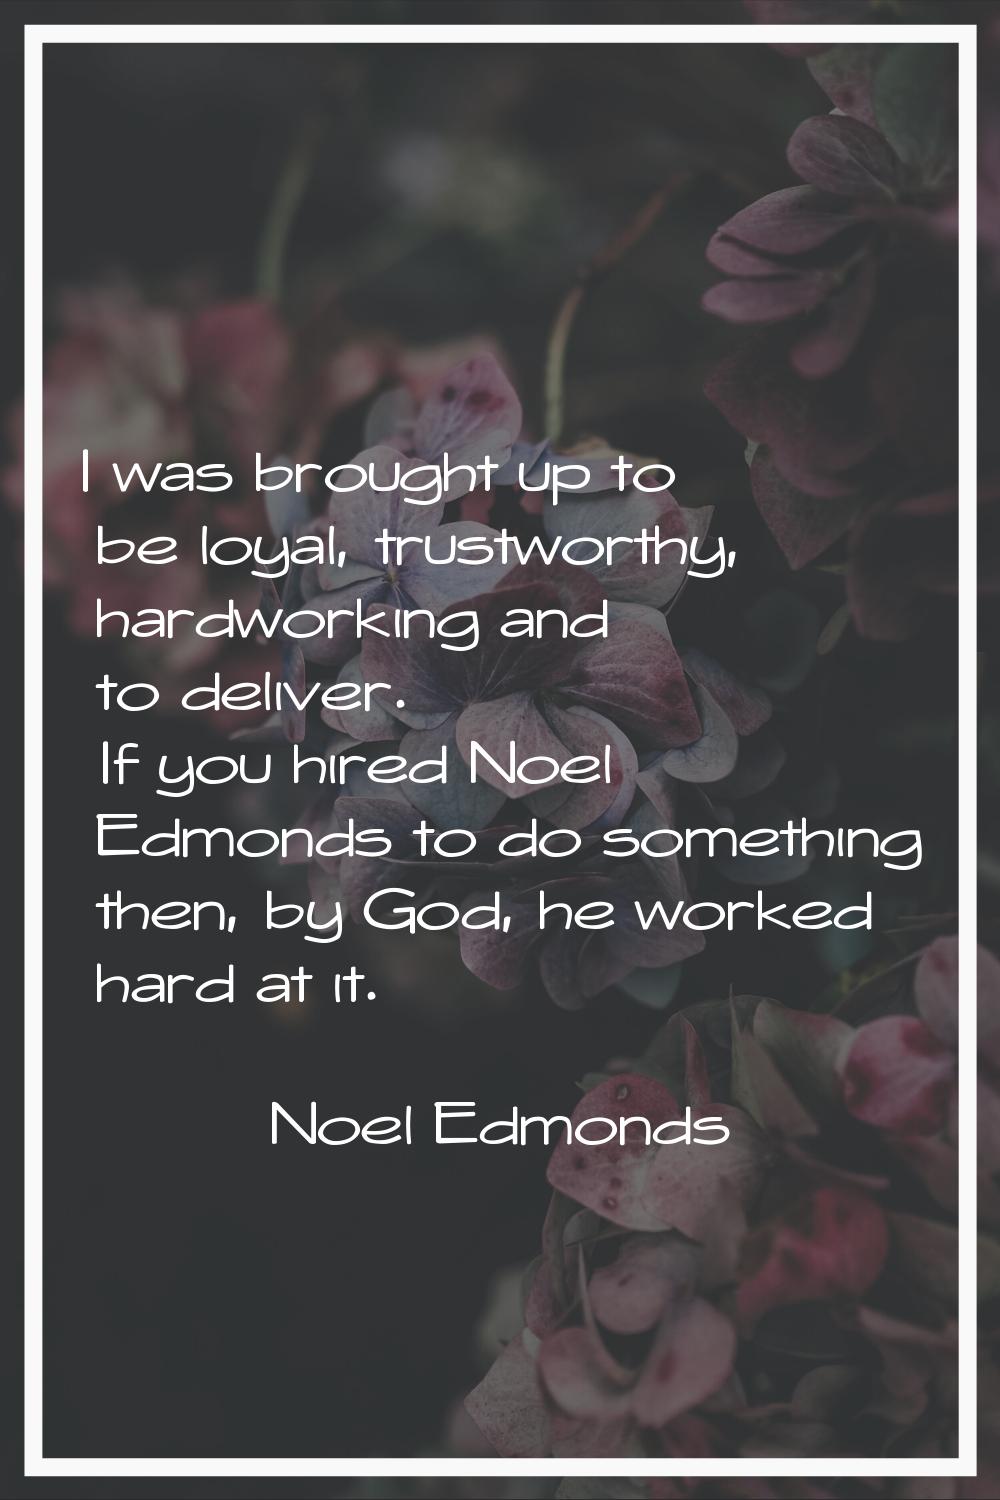 I was brought up to be loyal, trustworthy, hardworking and to deliver. If you hired Noel Edmonds to